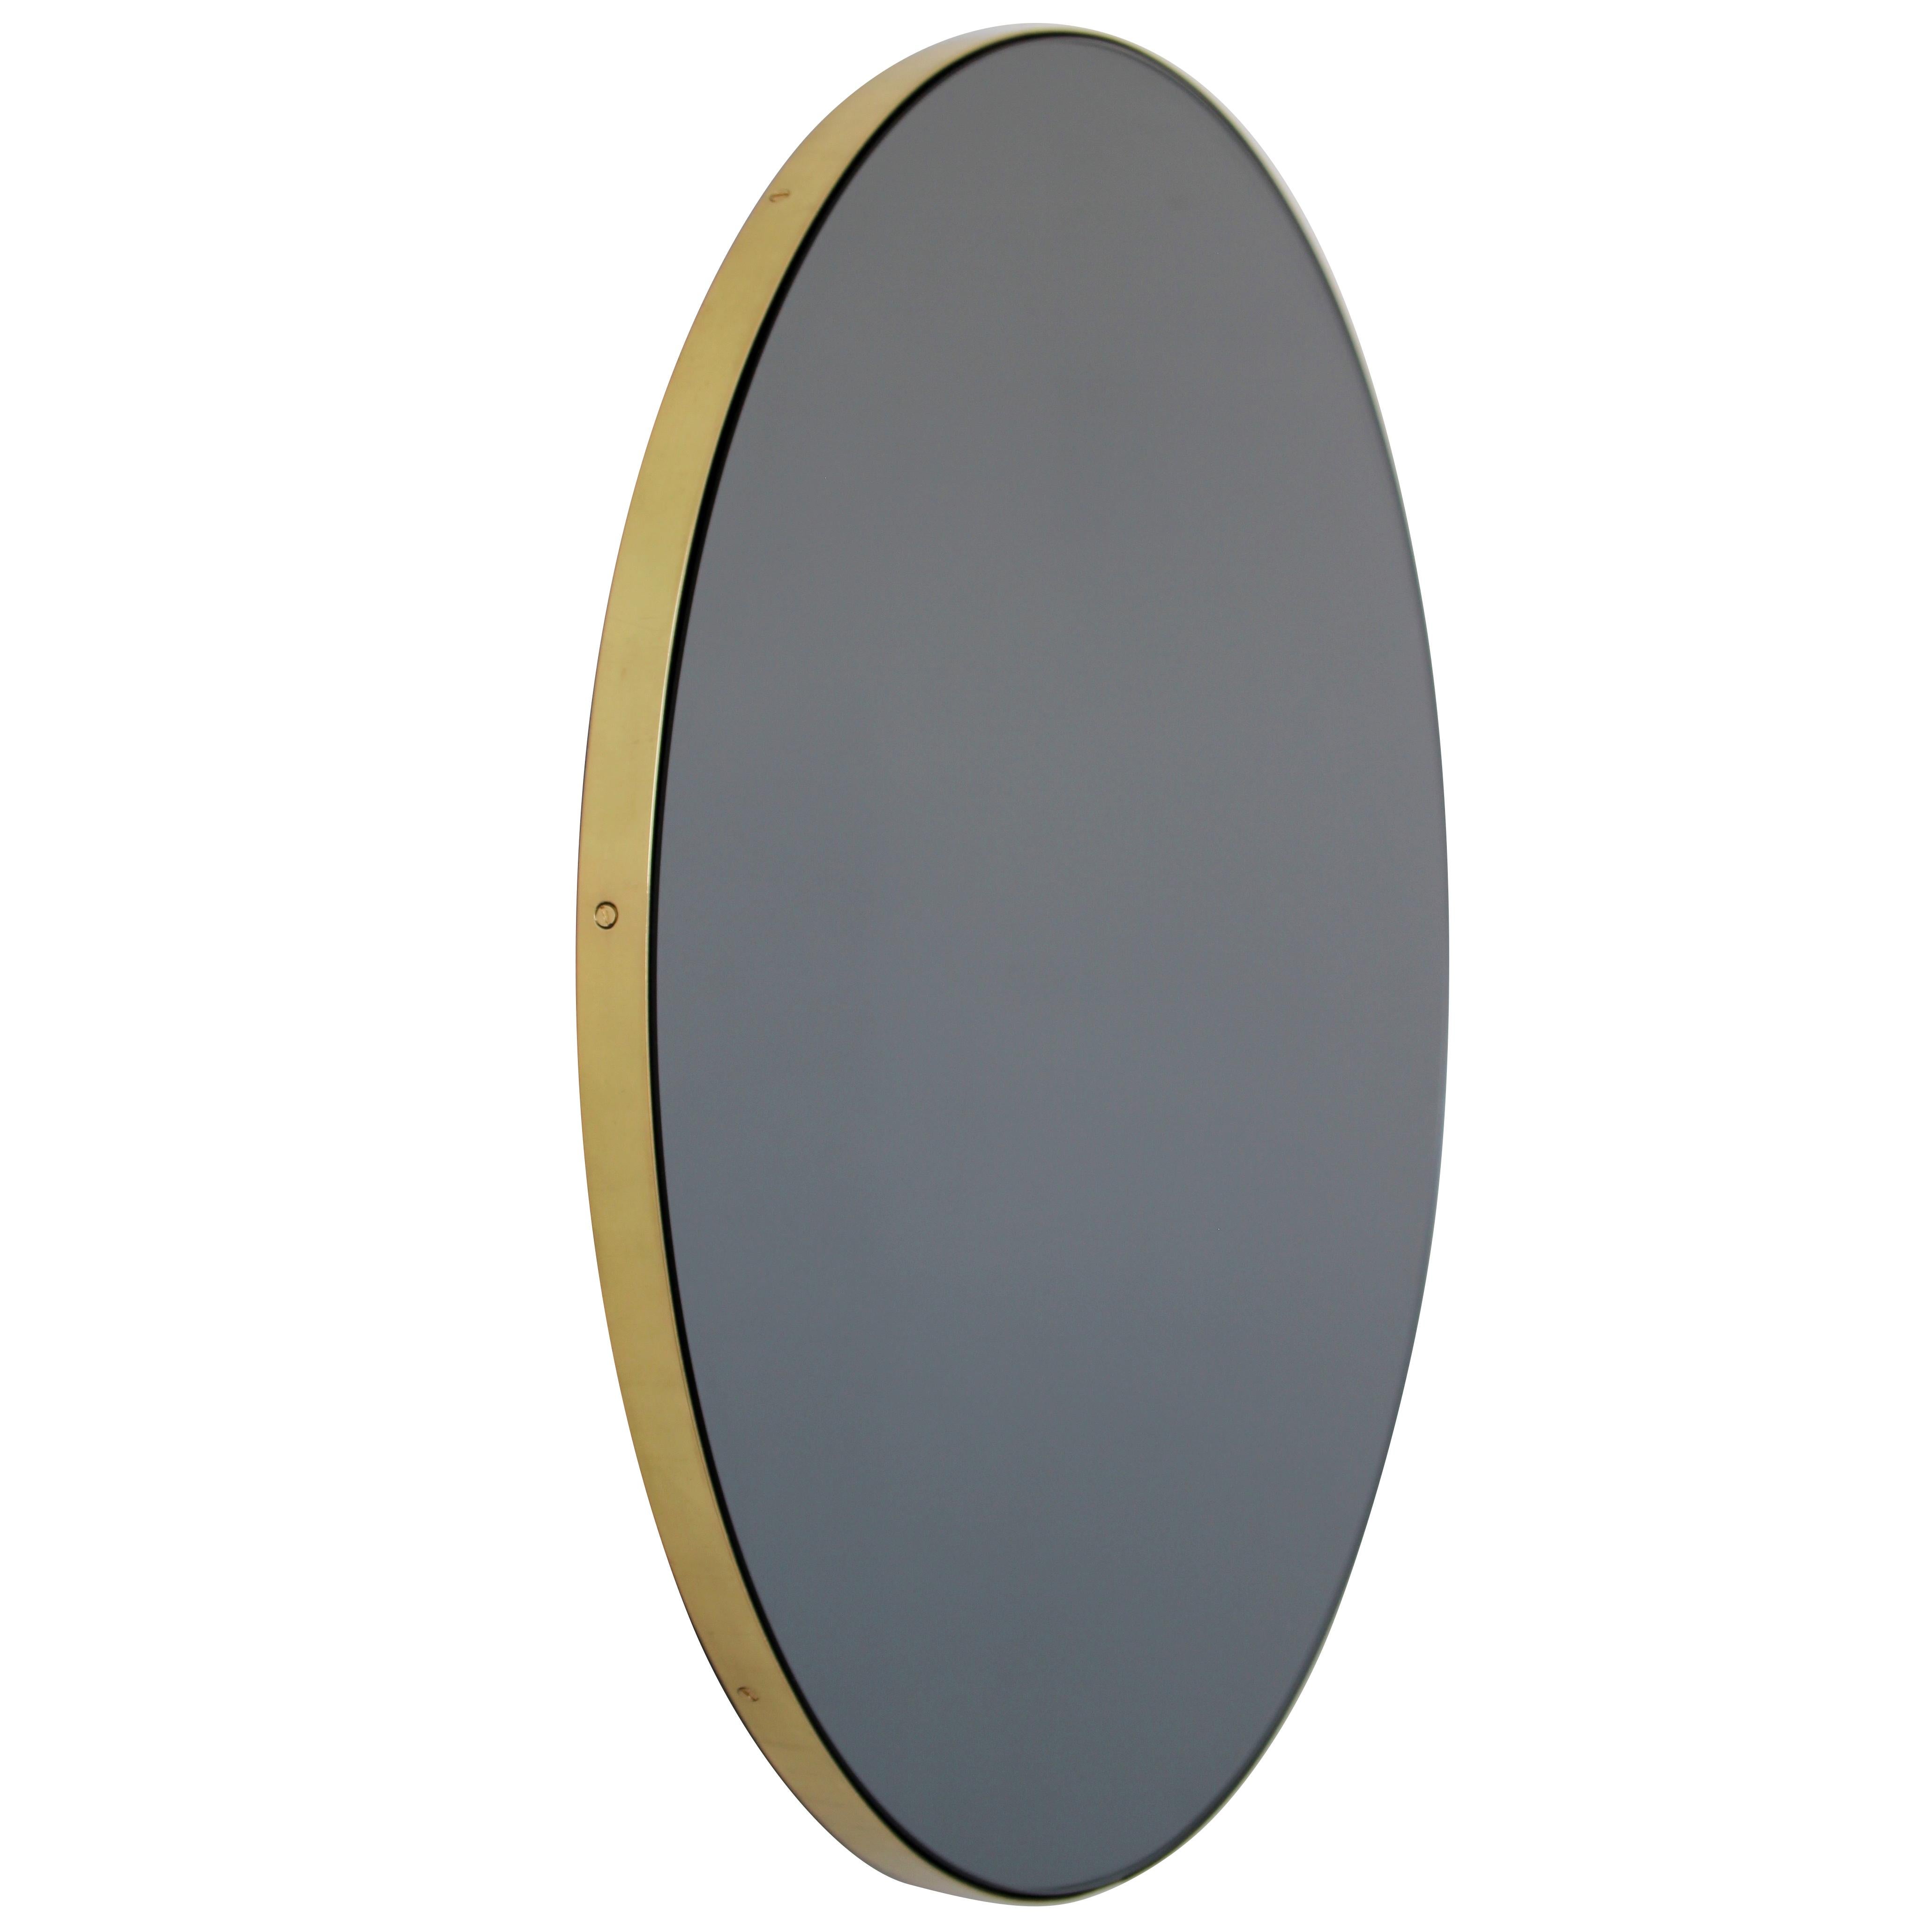 Minimalist black tinted round mirror with a minimalist solid brushed brass frame. The detailing and finish, including visible brass screws, emphasise the crafty and quality feel of the mirror, a true signature of our brand. Designed and made in